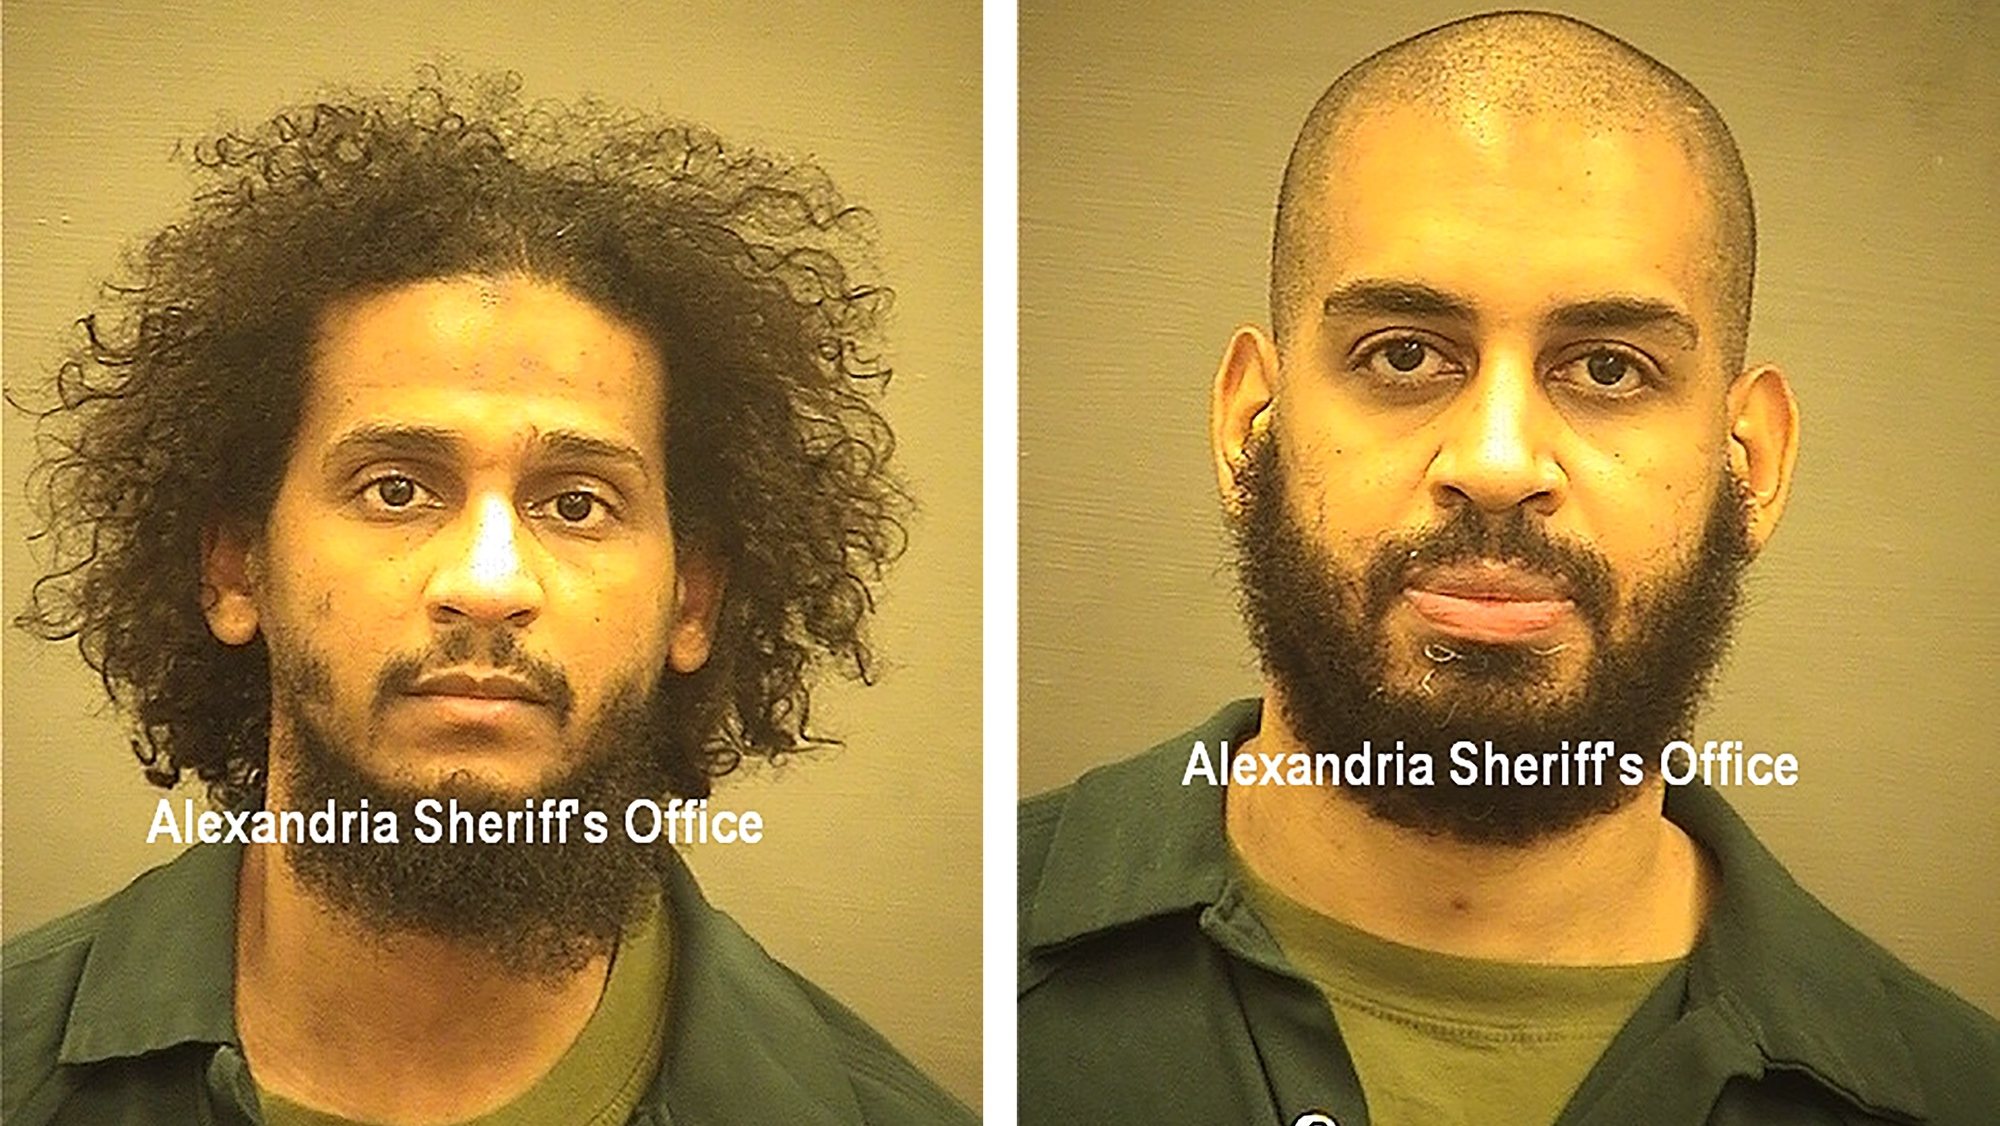 epa08729098 A Composite handout booking images of alleged ISIS members Alexanda Kotey (L) and El Shafee Elsheikh (R) released by the Alexandria (Virignia) Sheriff&#039;s Office after the two were flown to the United States to face federal terrorism charges in Alexandria, Virginia, USA, 08 October 2020.  EPA/ALEXANDRIA SHERIFF&#039;S OFFICE / HANDOUT  HANDOUT EDITORIAL USE ONLY/NO SALES